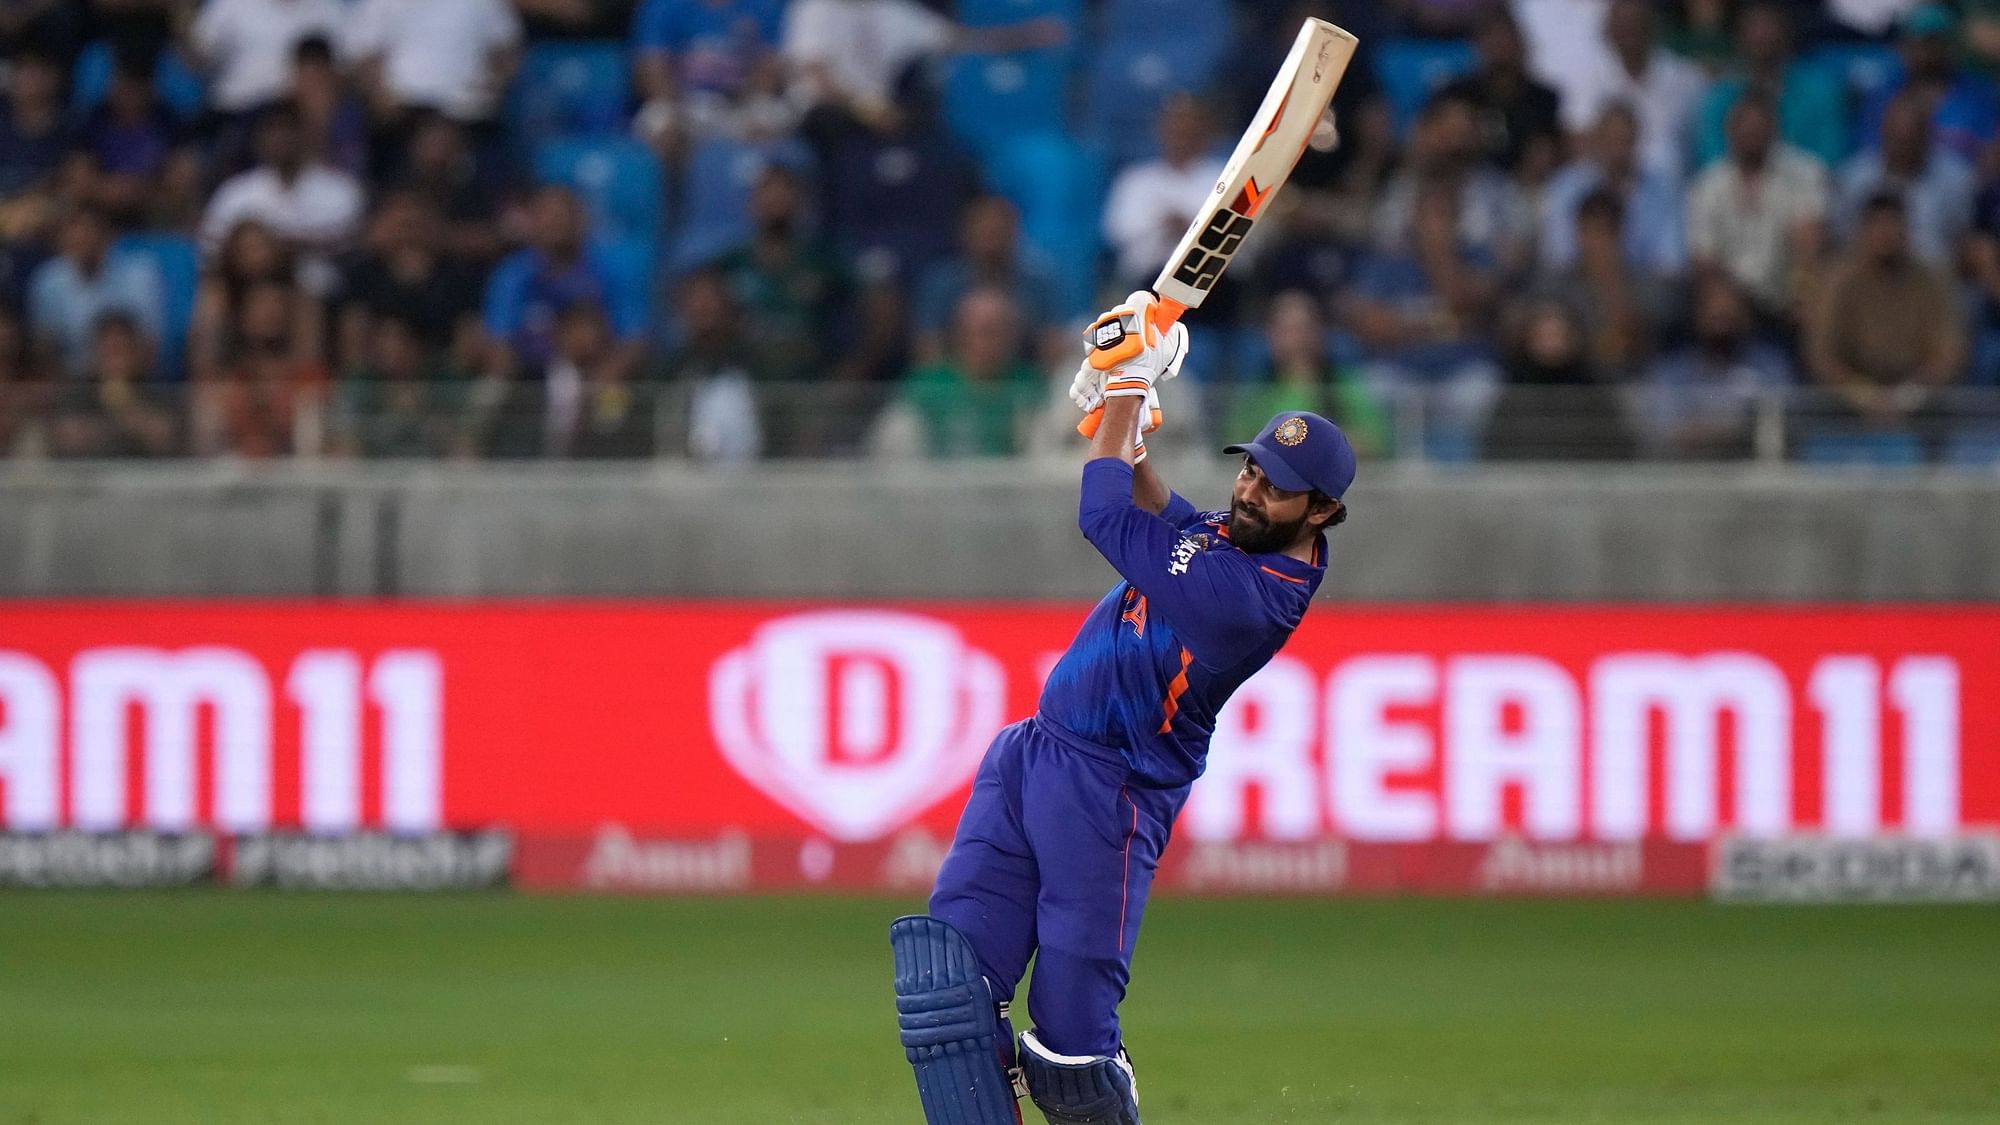 <div class="paragraphs"><p>All-rounder Ravindra Jadeja played a vital knock in the crucial Asia Cup 2022 tie against Pakistan on Sunday.&nbsp;</p></div>